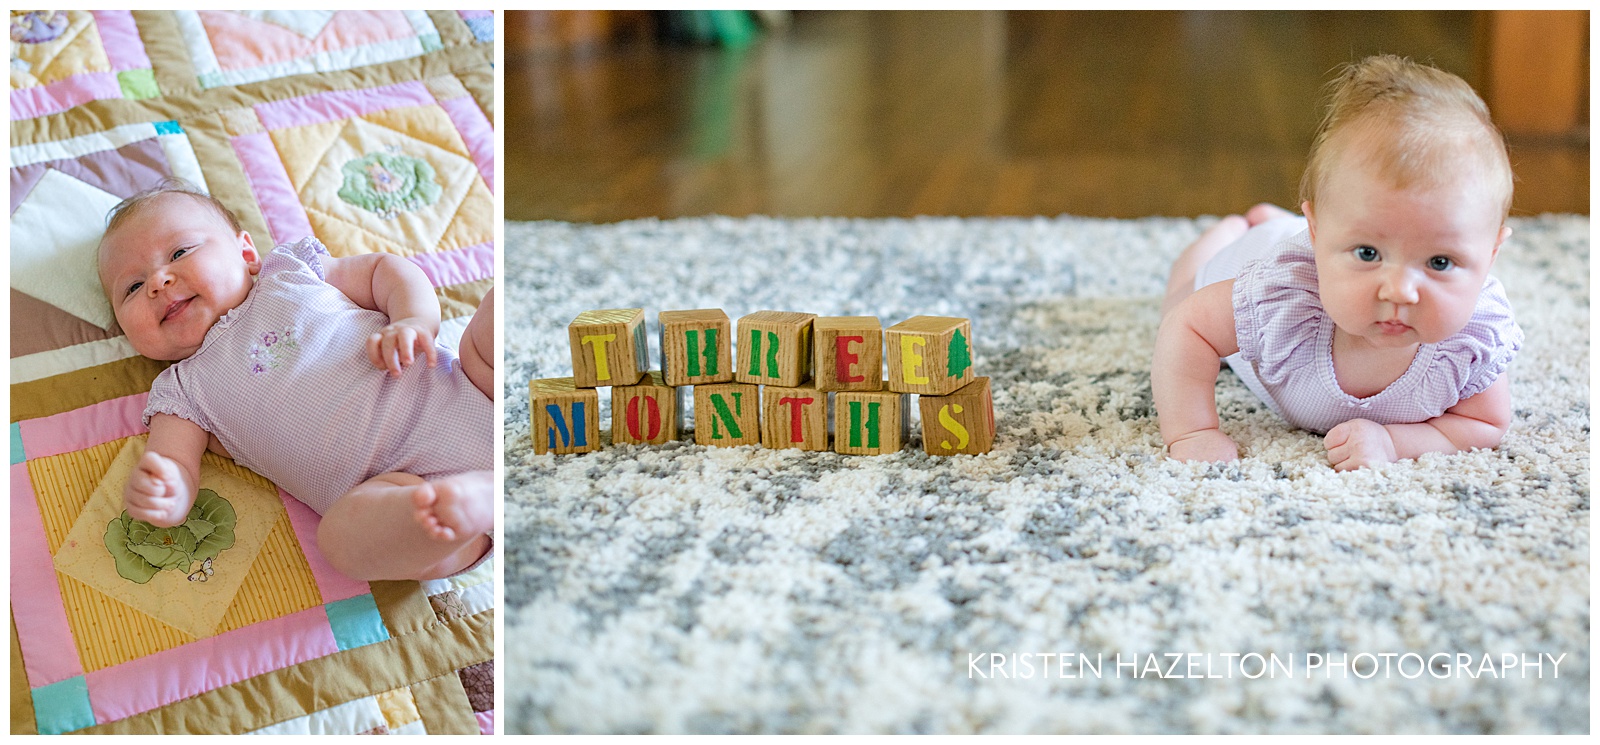 Three-month old baby on a homemade quilt and with blocks that say "three months"